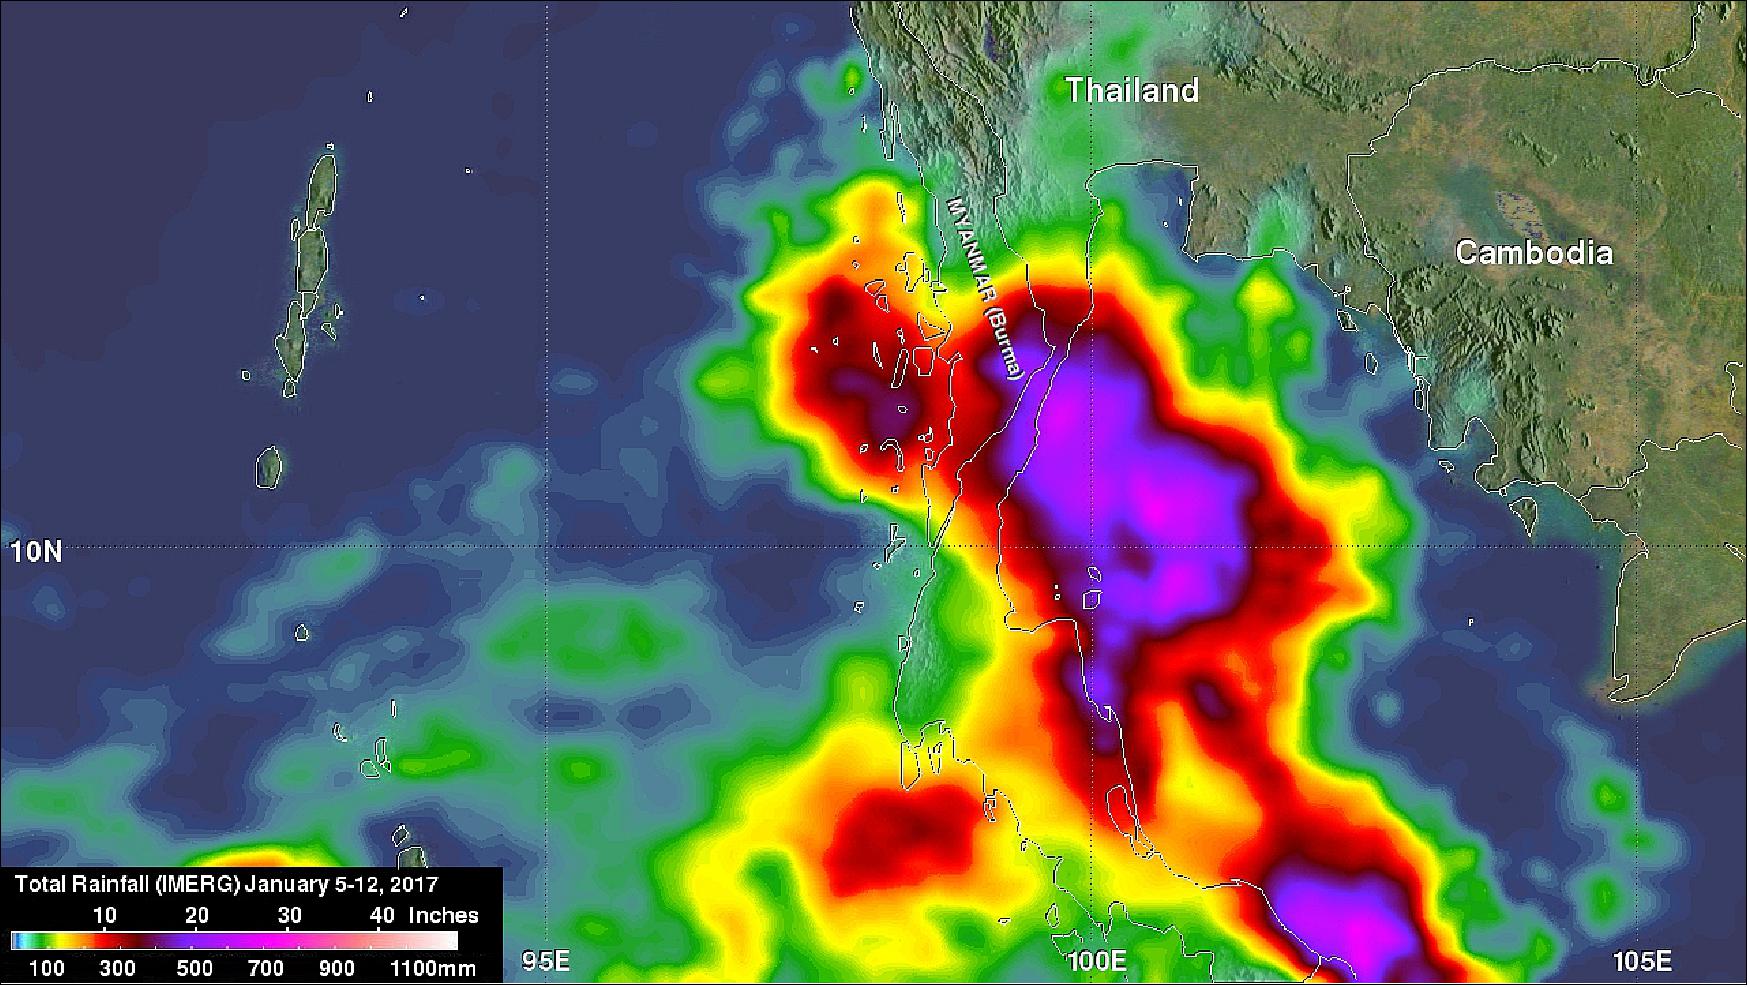 Figure 49: NASA calculated rainfall over southern Thailand from Jan. 5 to 12, 2017. Extreme rainfall totals of over 700 mm were found over the Gulf of Thailand. Highest totals over land were greater than 500 mm on the eastern coast of the Malay Peninsula in the Bang Saphan District (image credit: NASA/JAXA, Hal Pierce)